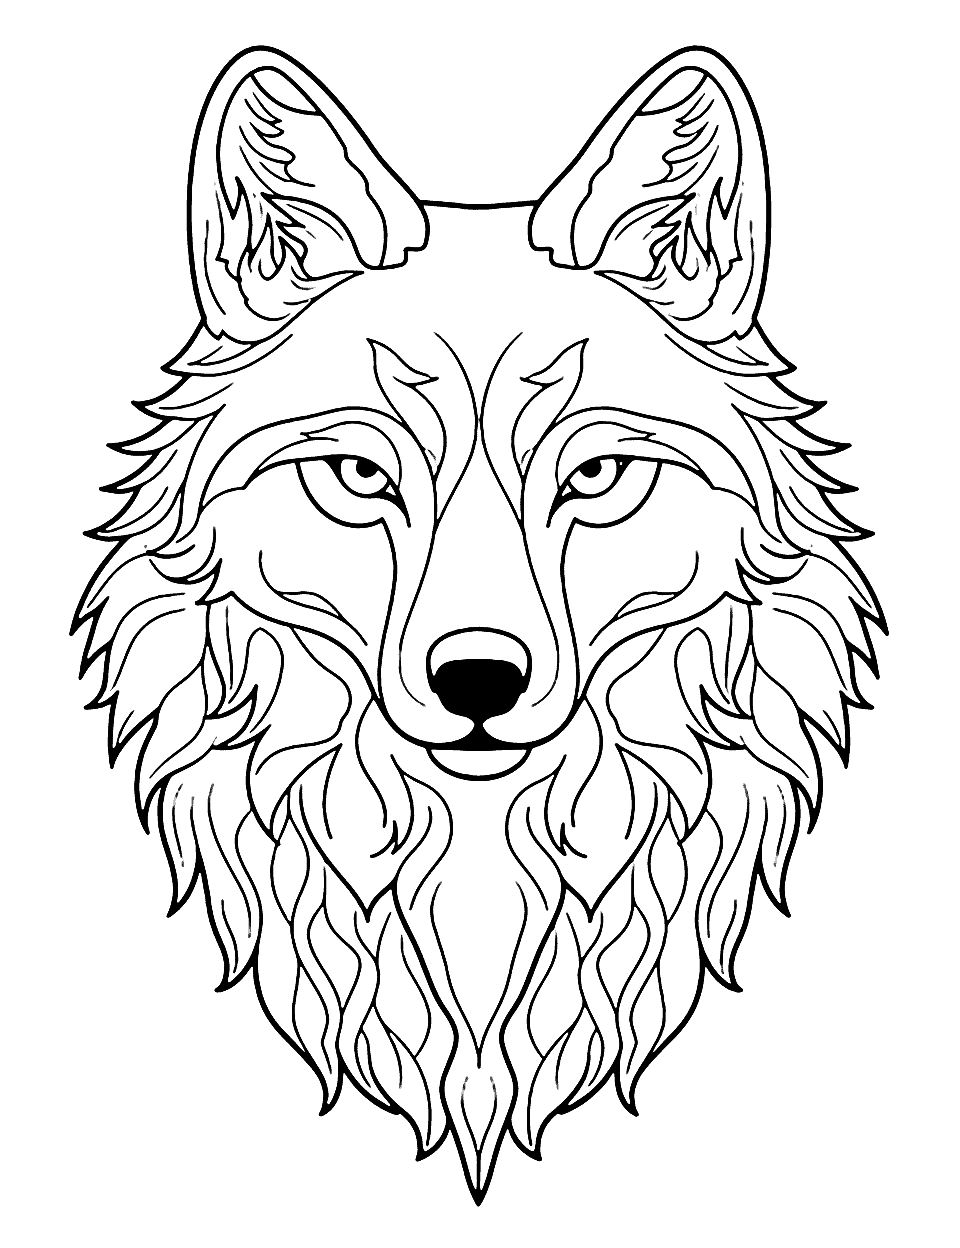 Wolf Mandala Coloring Page - Intricate mandala patterns radiating outwards from a central wolf head design.